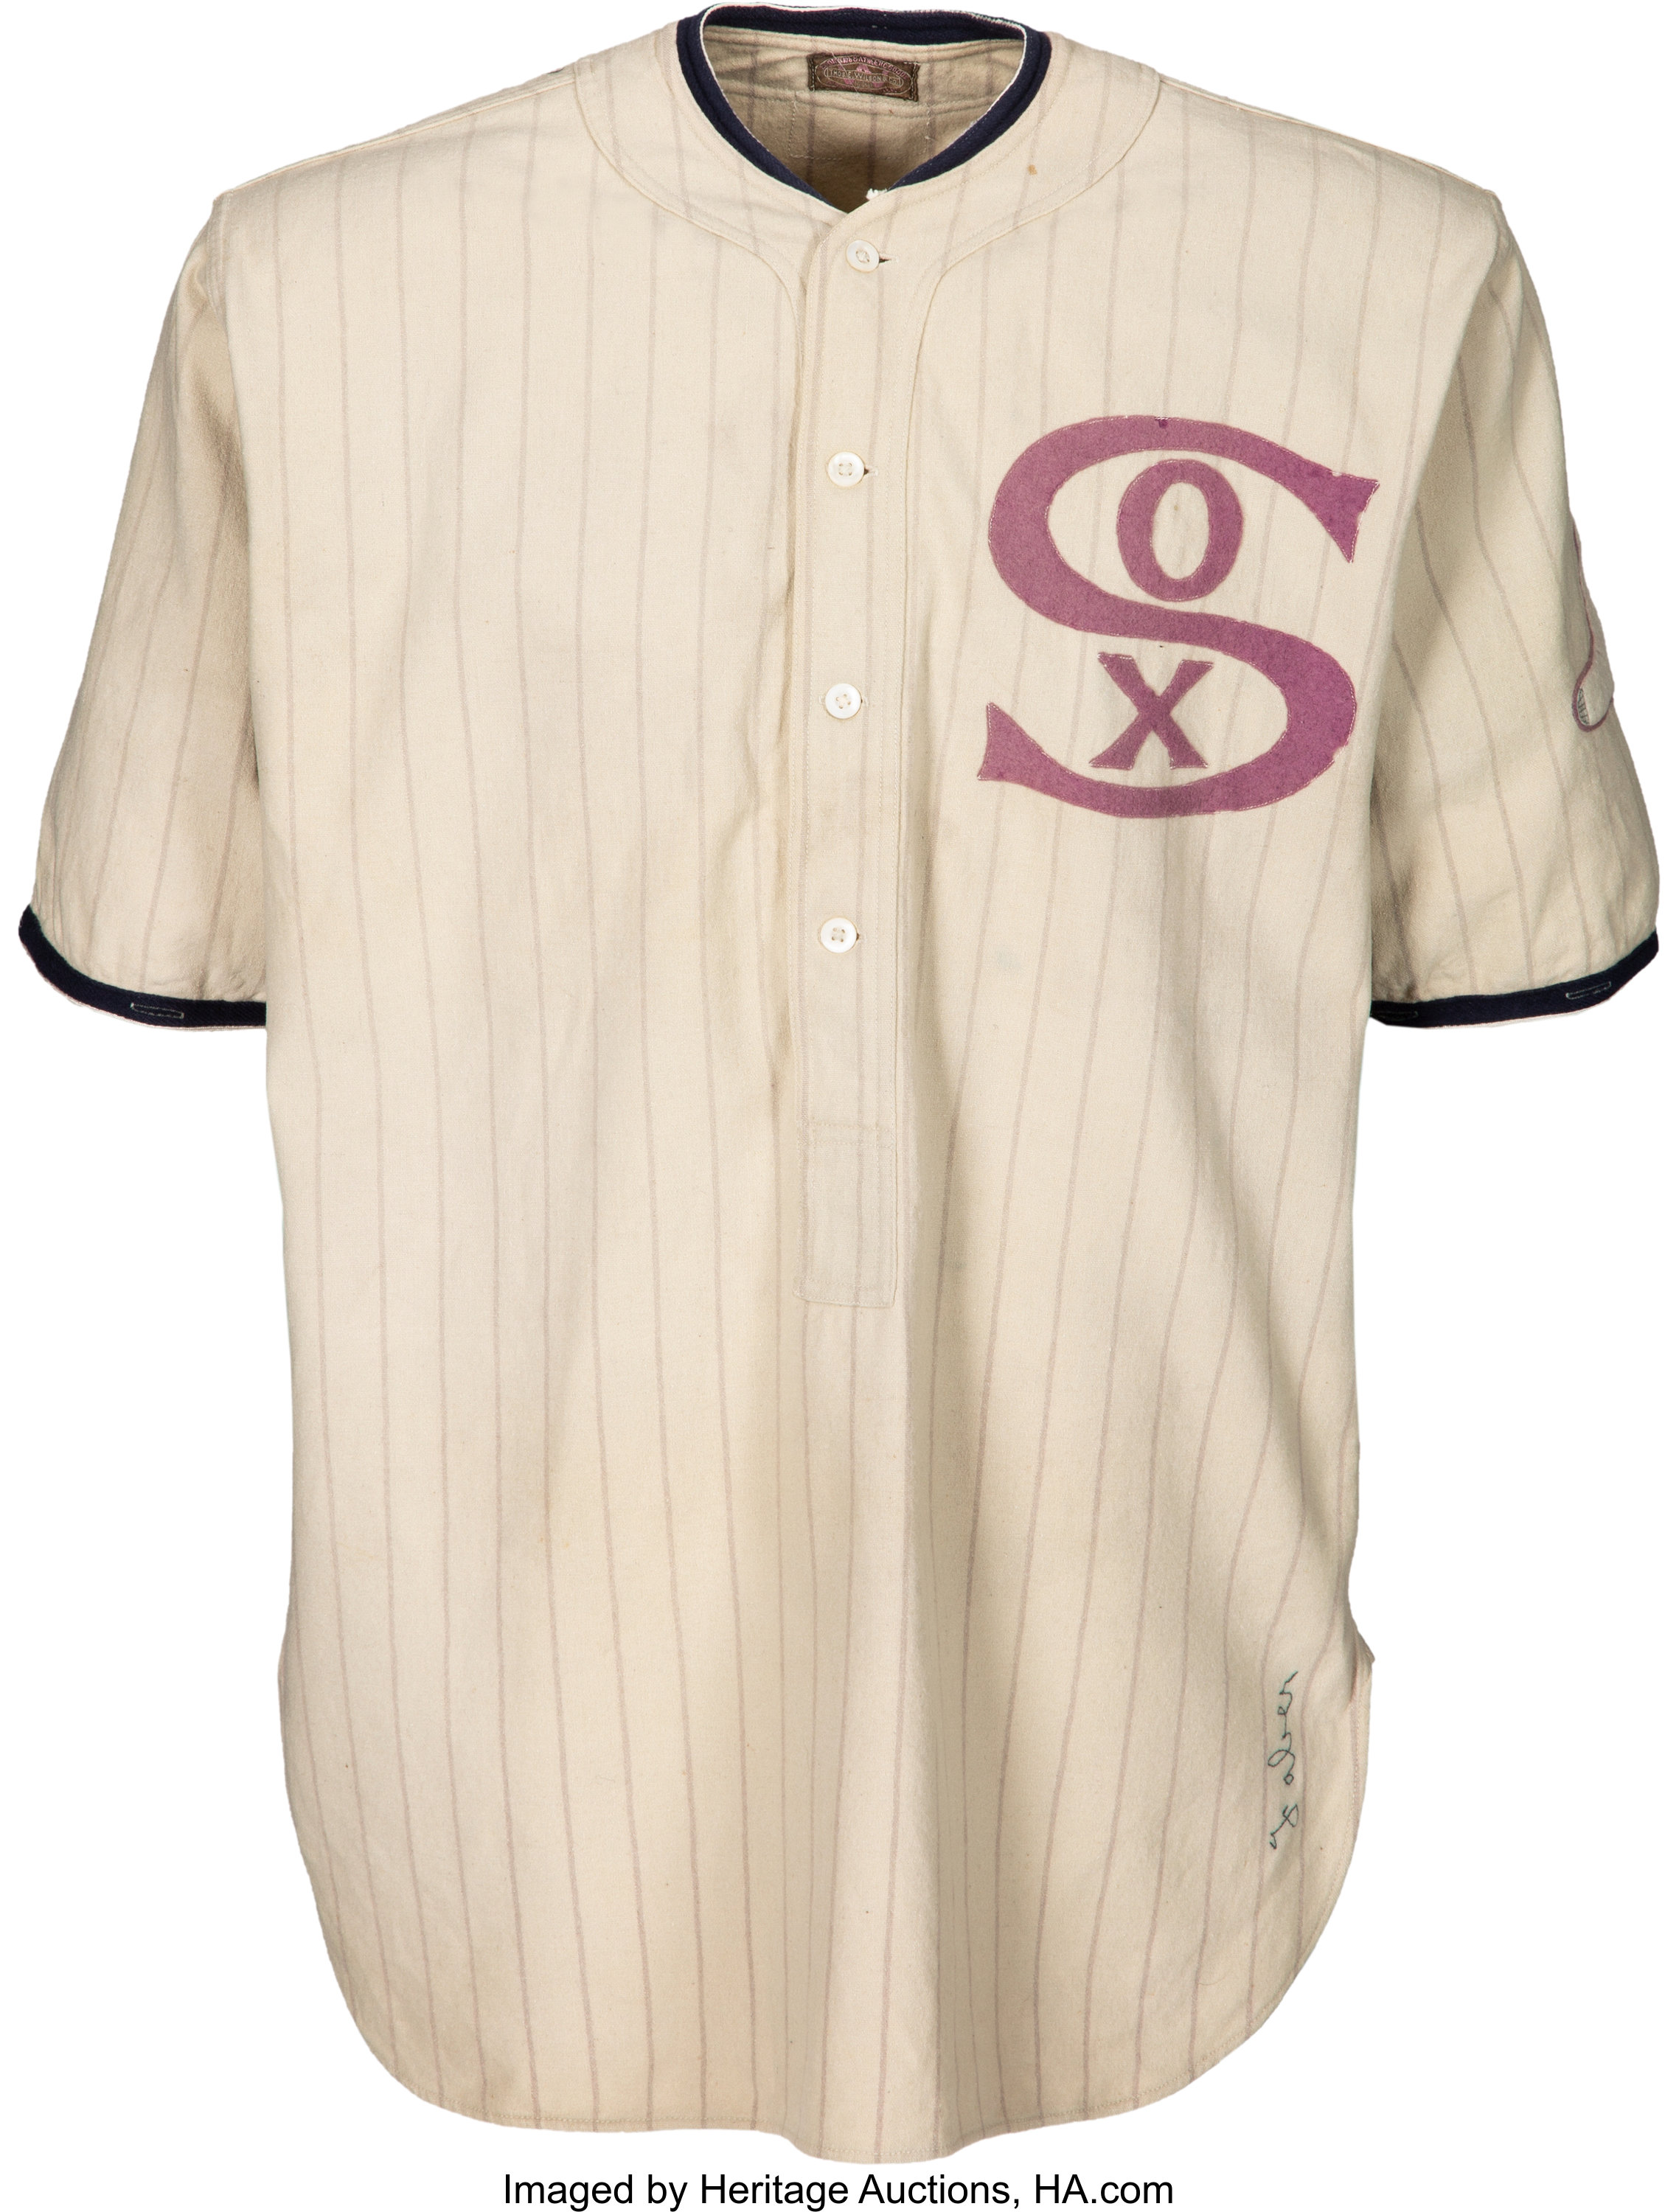 Tops, Pink Chicago White Sox Jersey